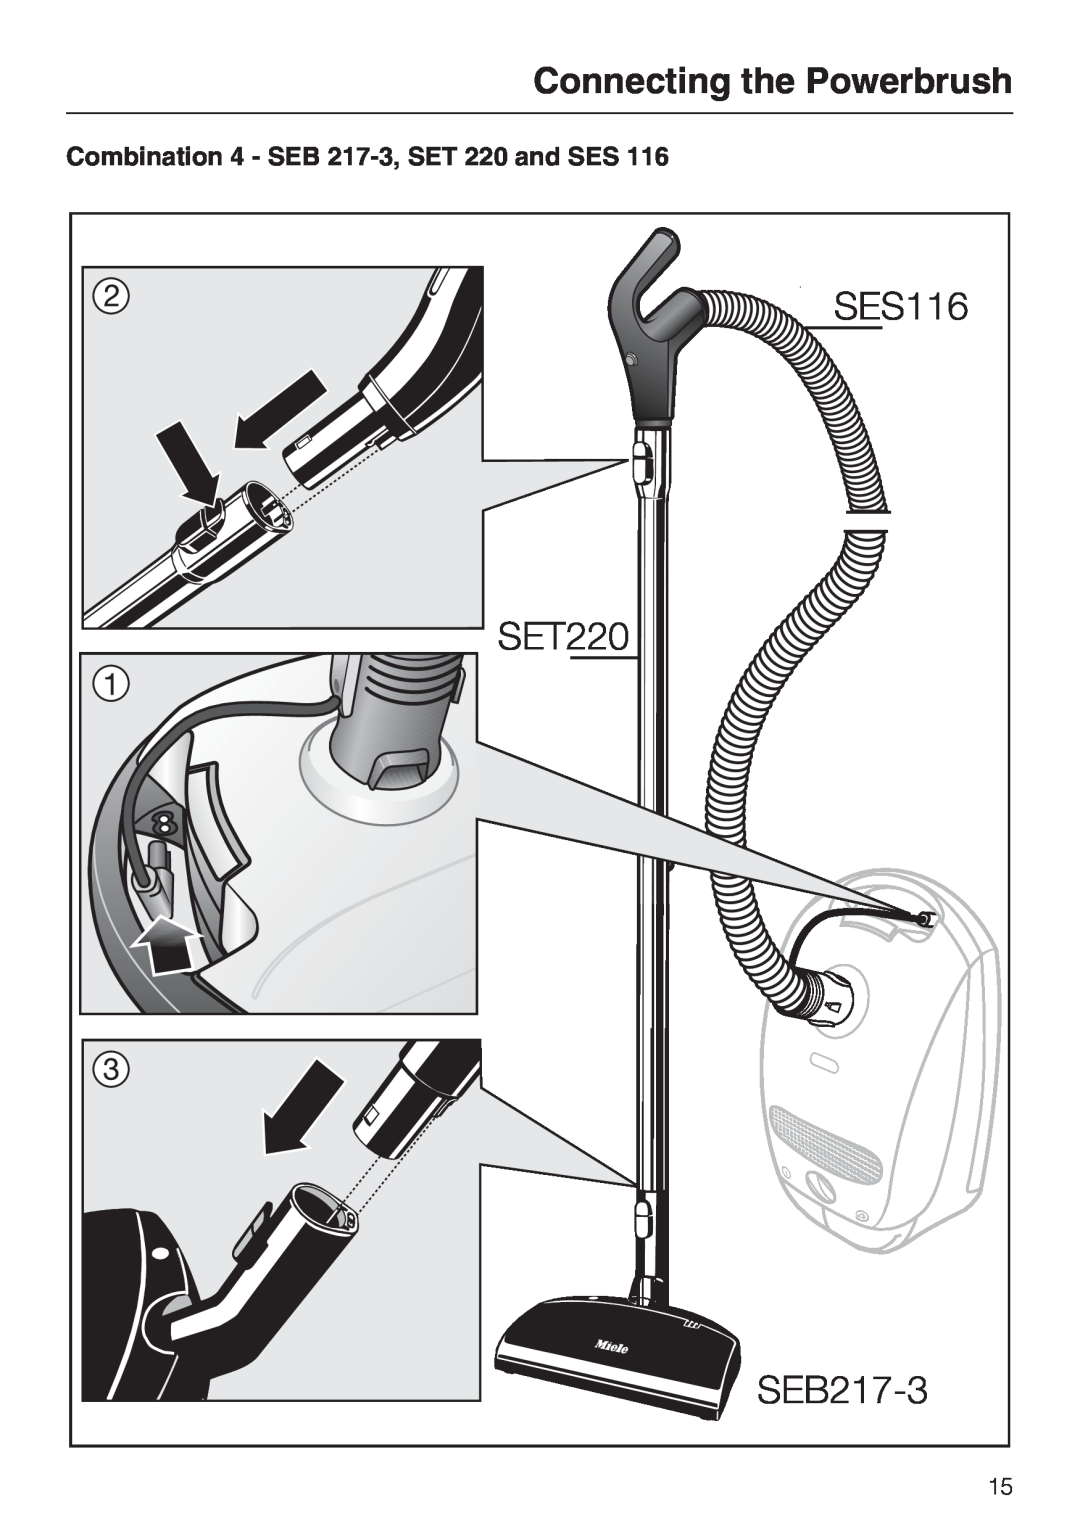 Miele 213-2, 217-2 operating instructions Connecting the Powerbrush, Combination 4 - SEB 217-3,SET 220 and SES 